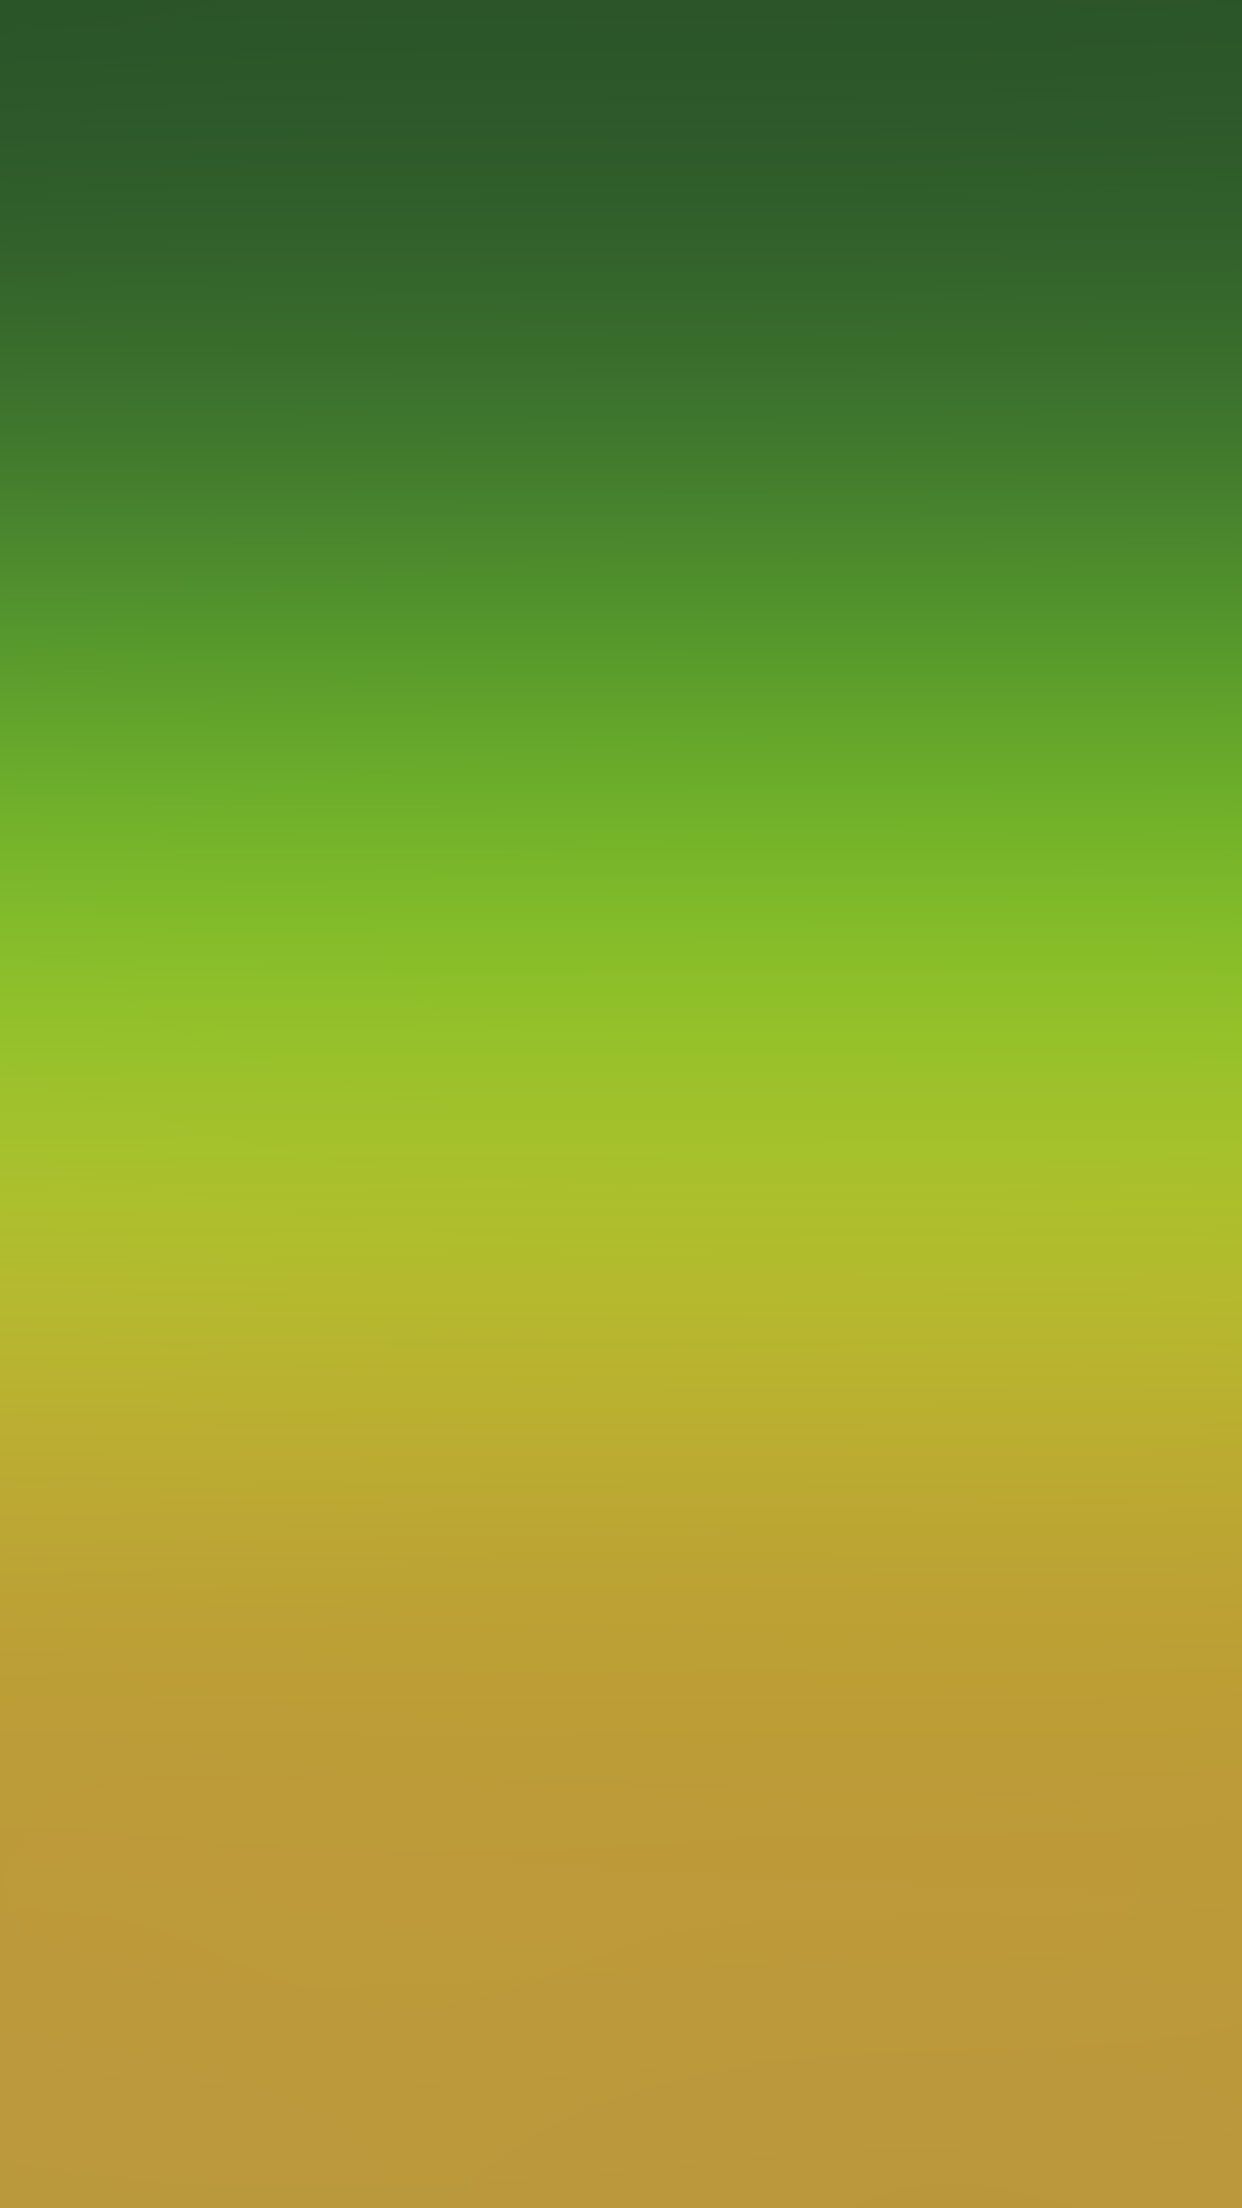 Wonderful Abstract, Green, Yellow background photo | Download Best Free pics